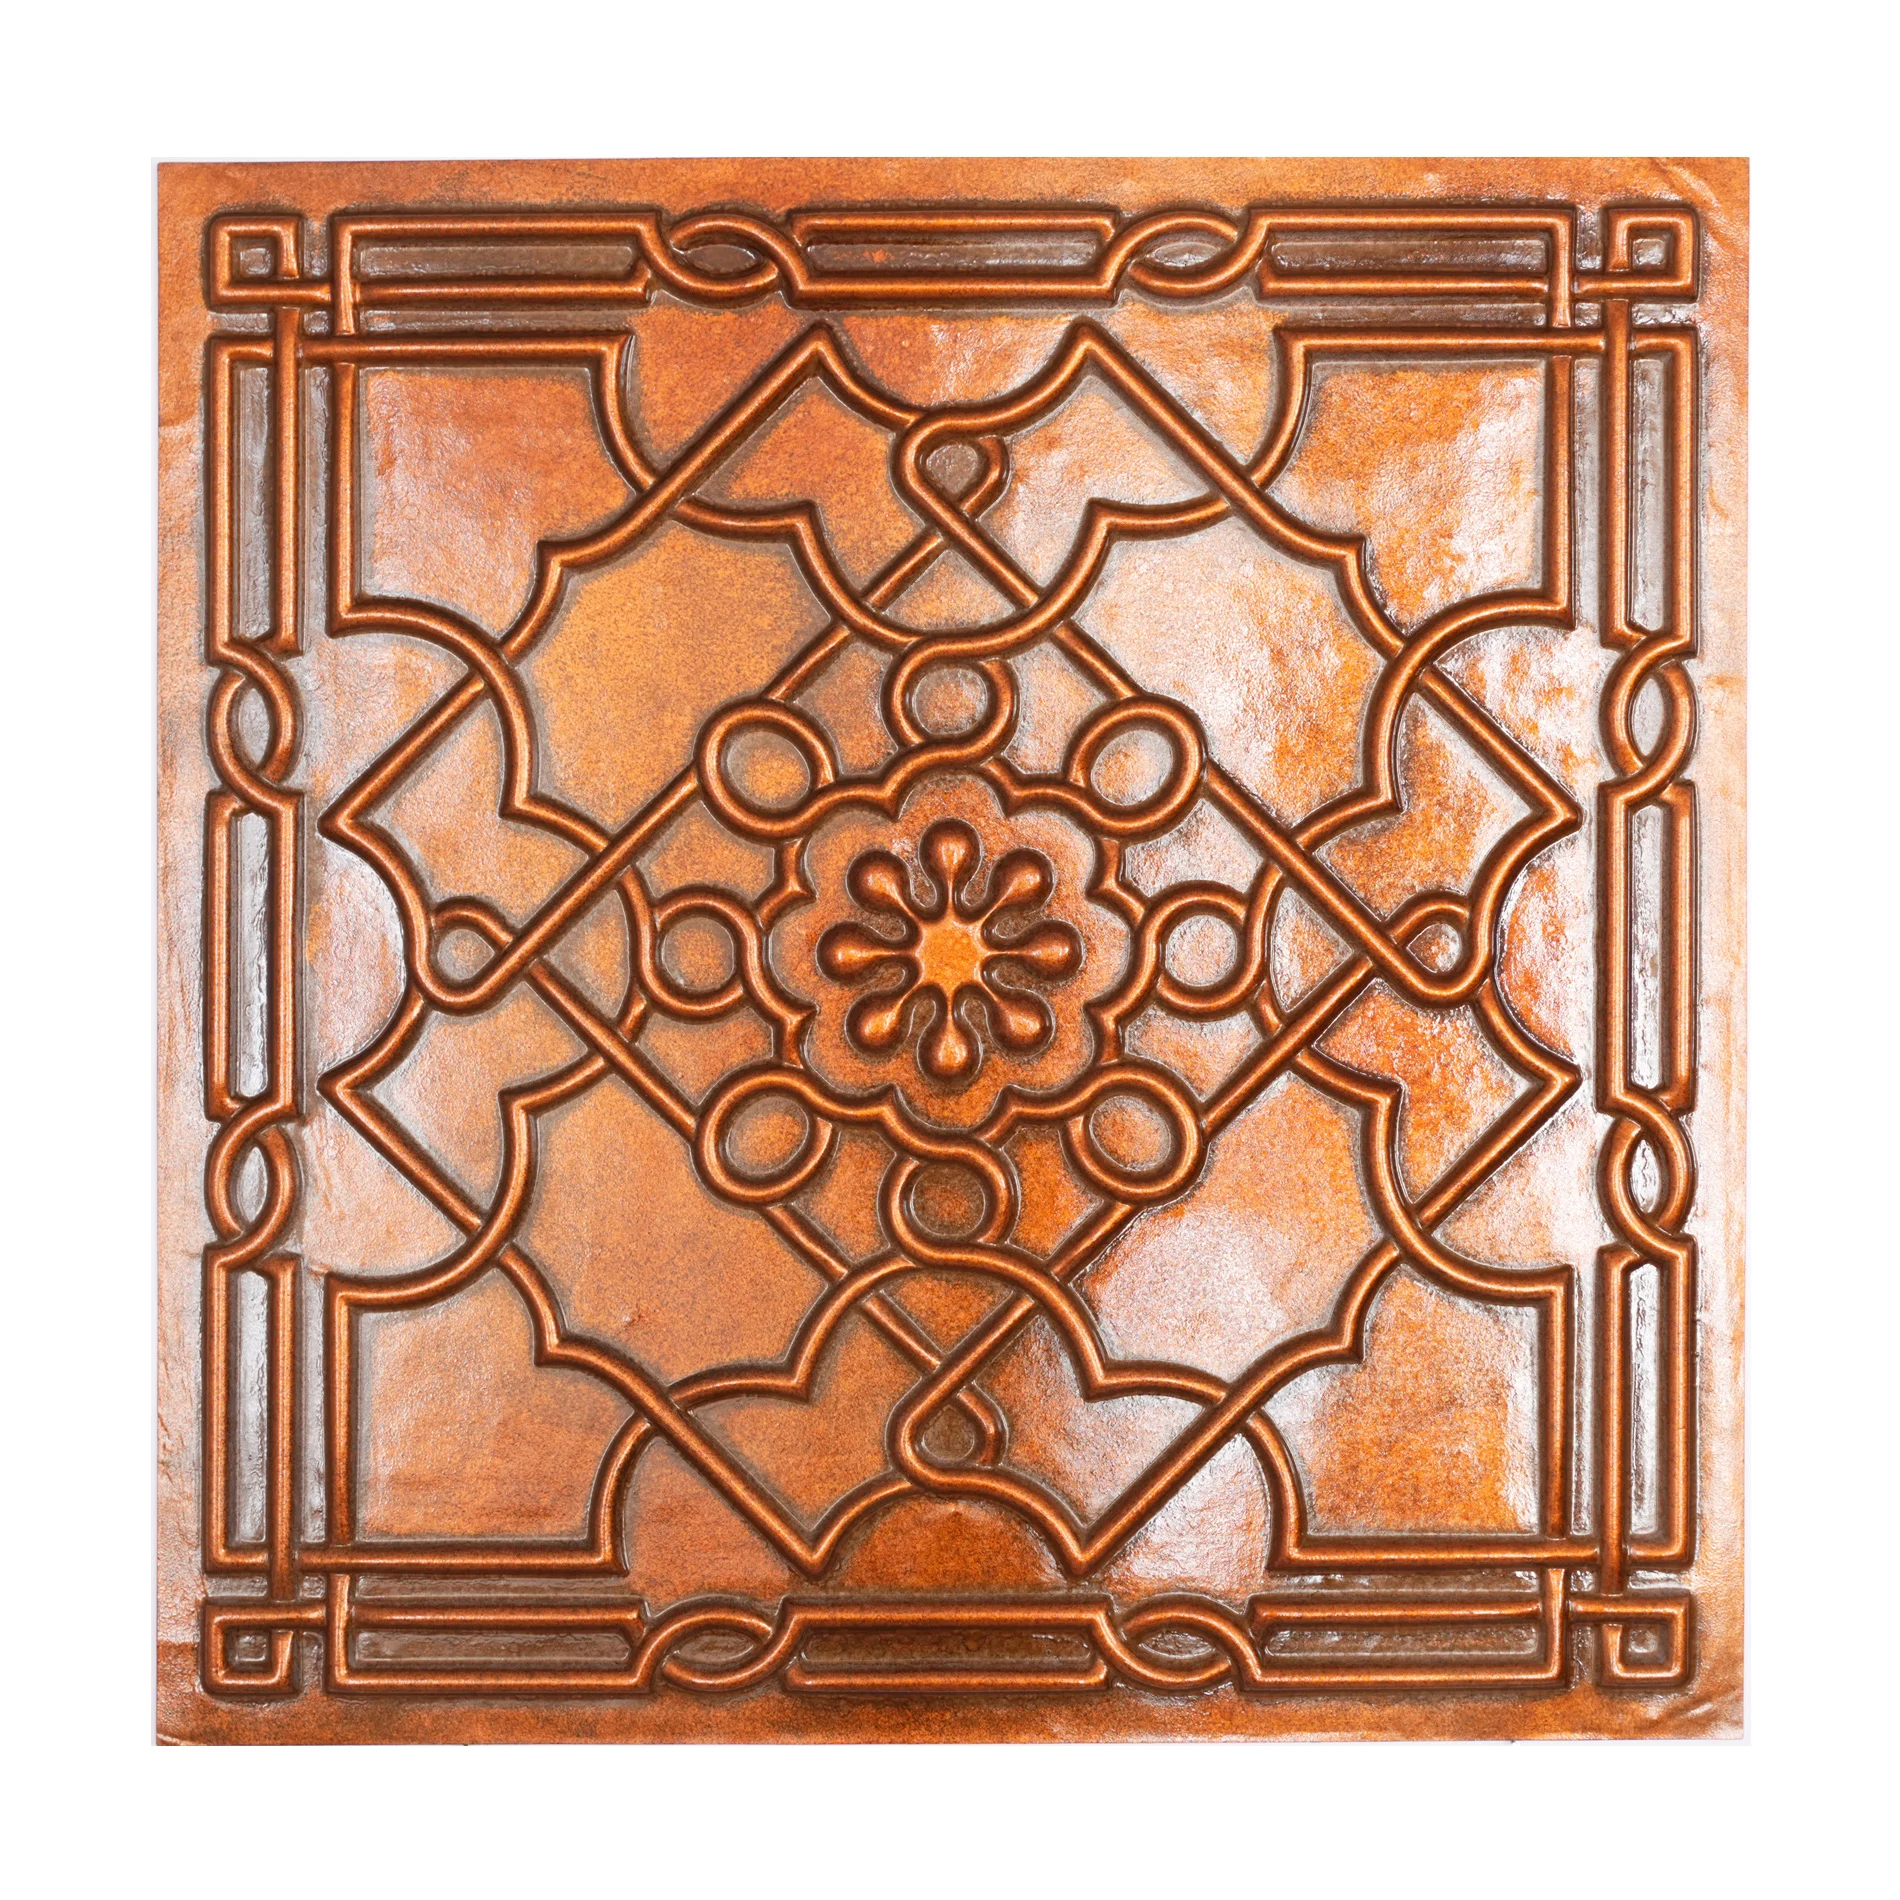 PVC ceiling panels Suspended ceiling tile Emboss interior wall panel PL09 archaic copper